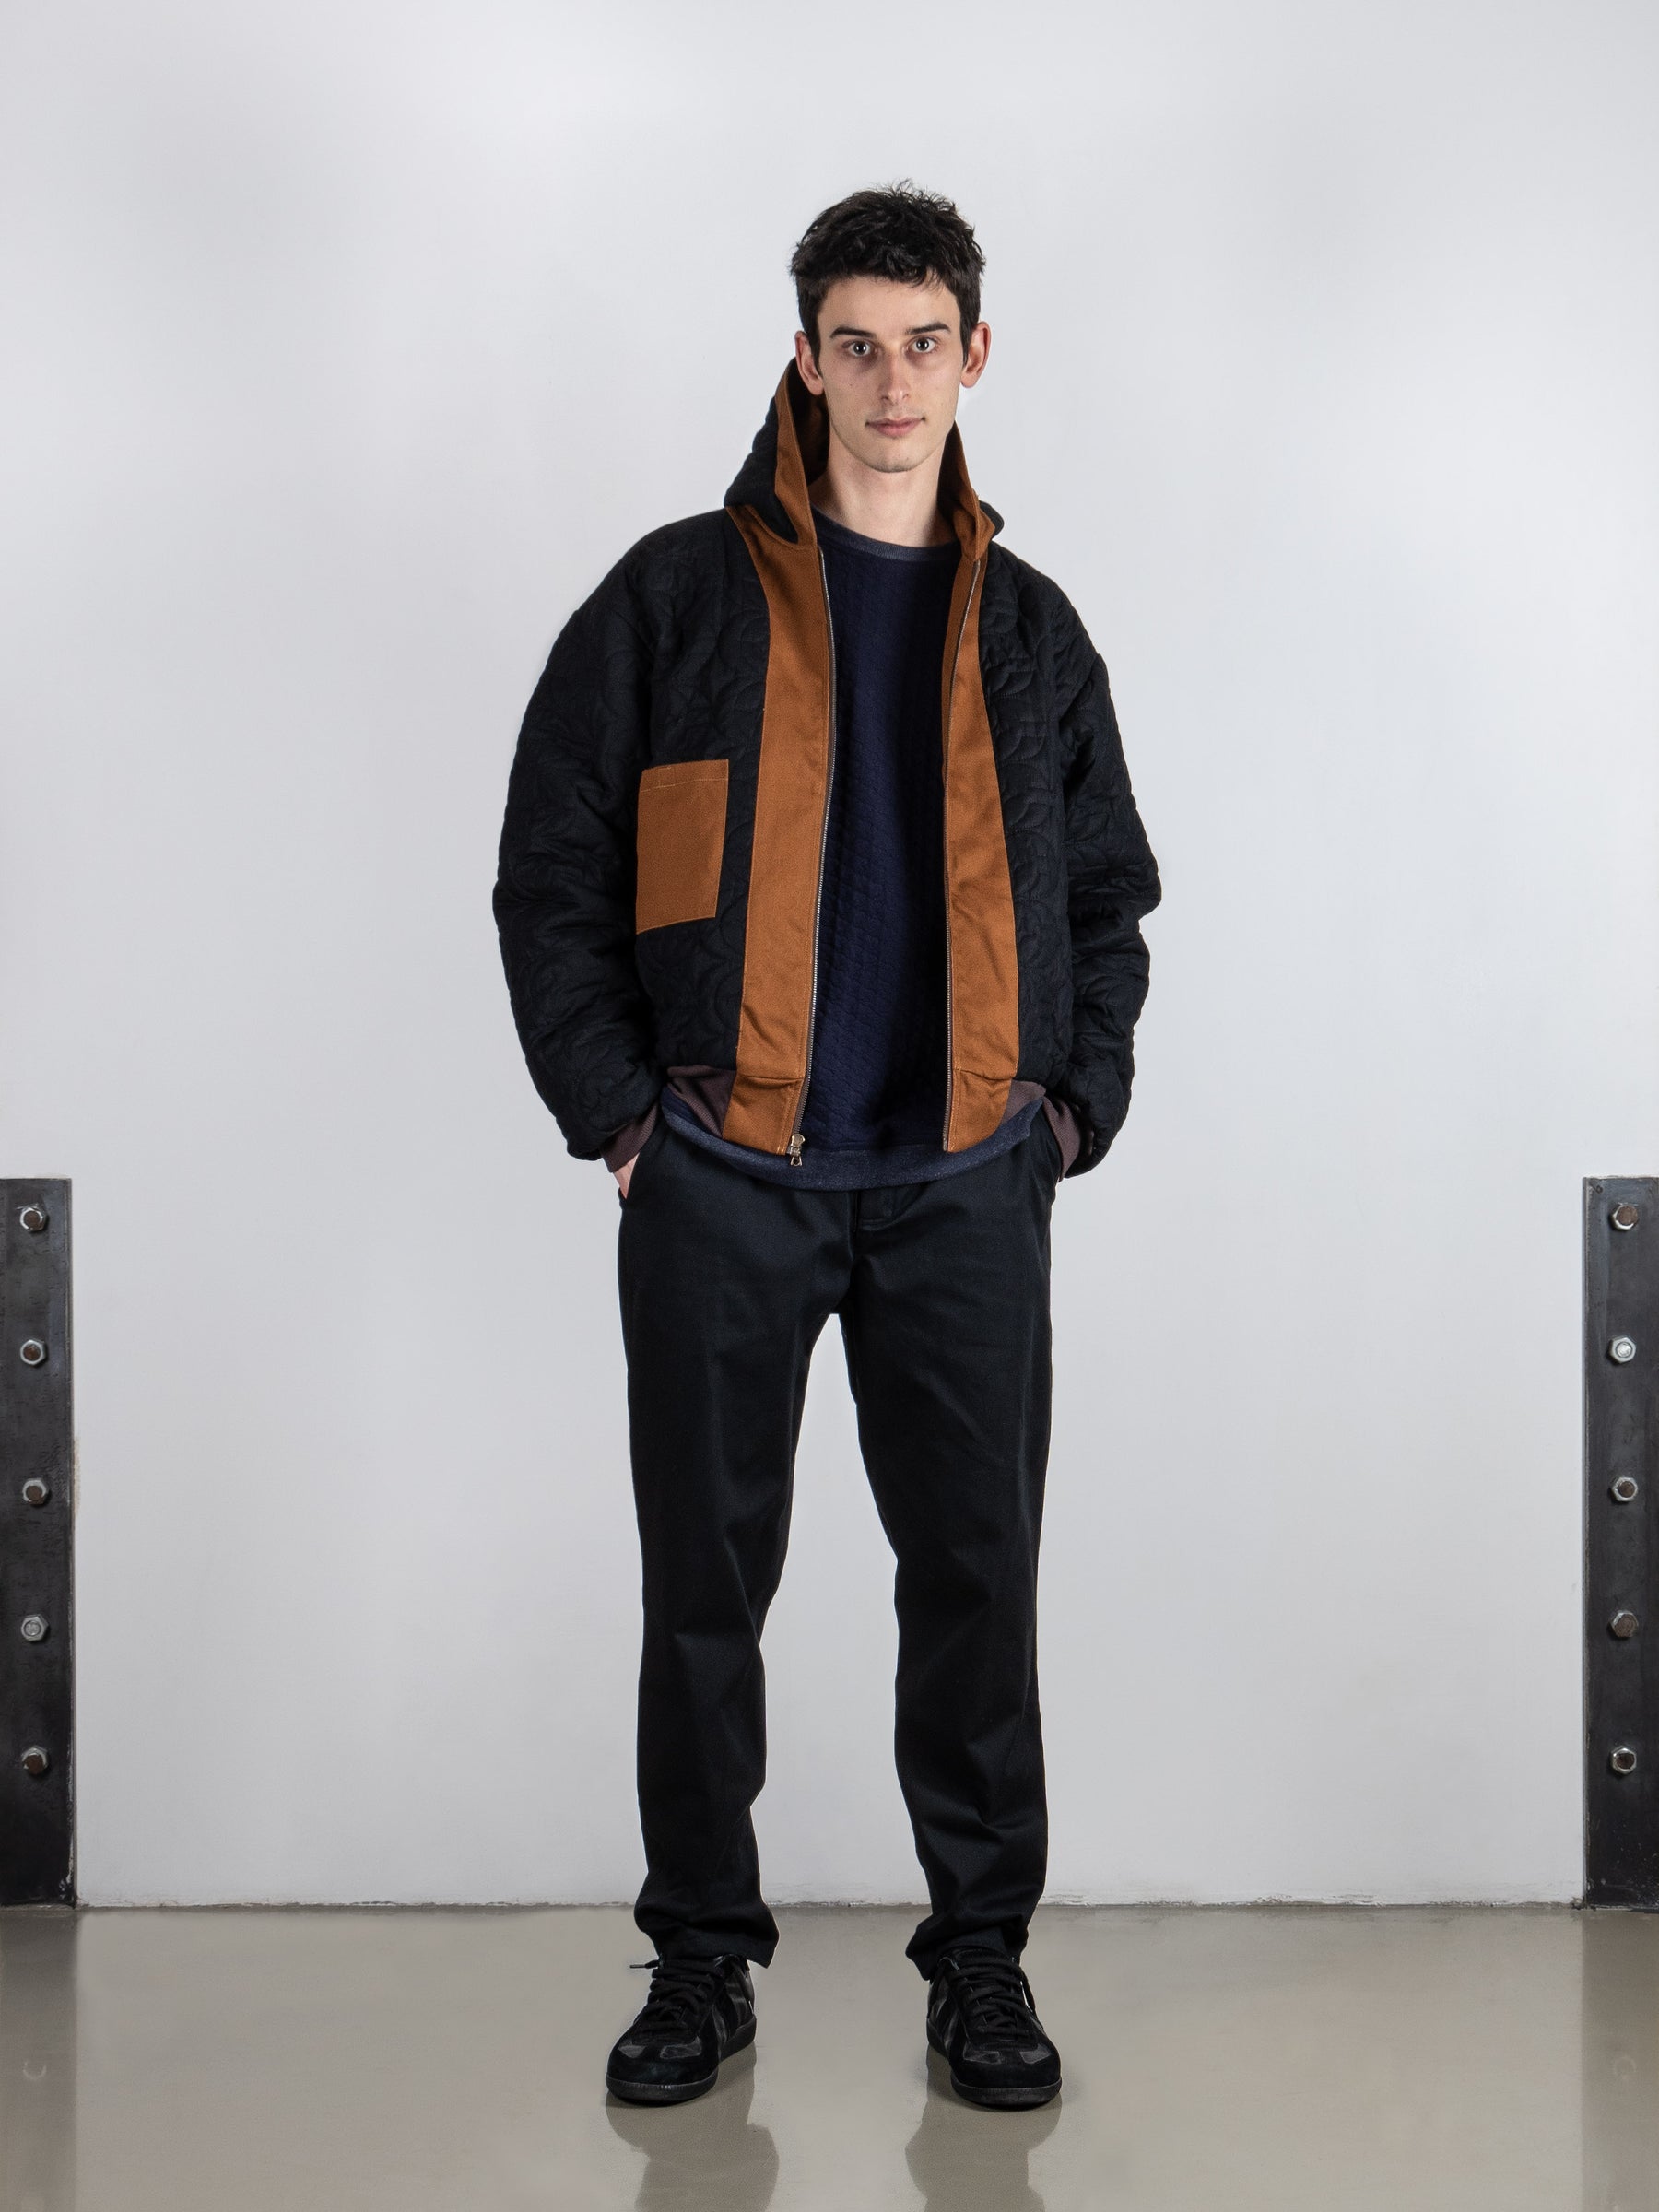 Unique Rust Hooded Duck Jacket with reversible design, showcasing quilted black lining as outer fabric for a distinct style twist.